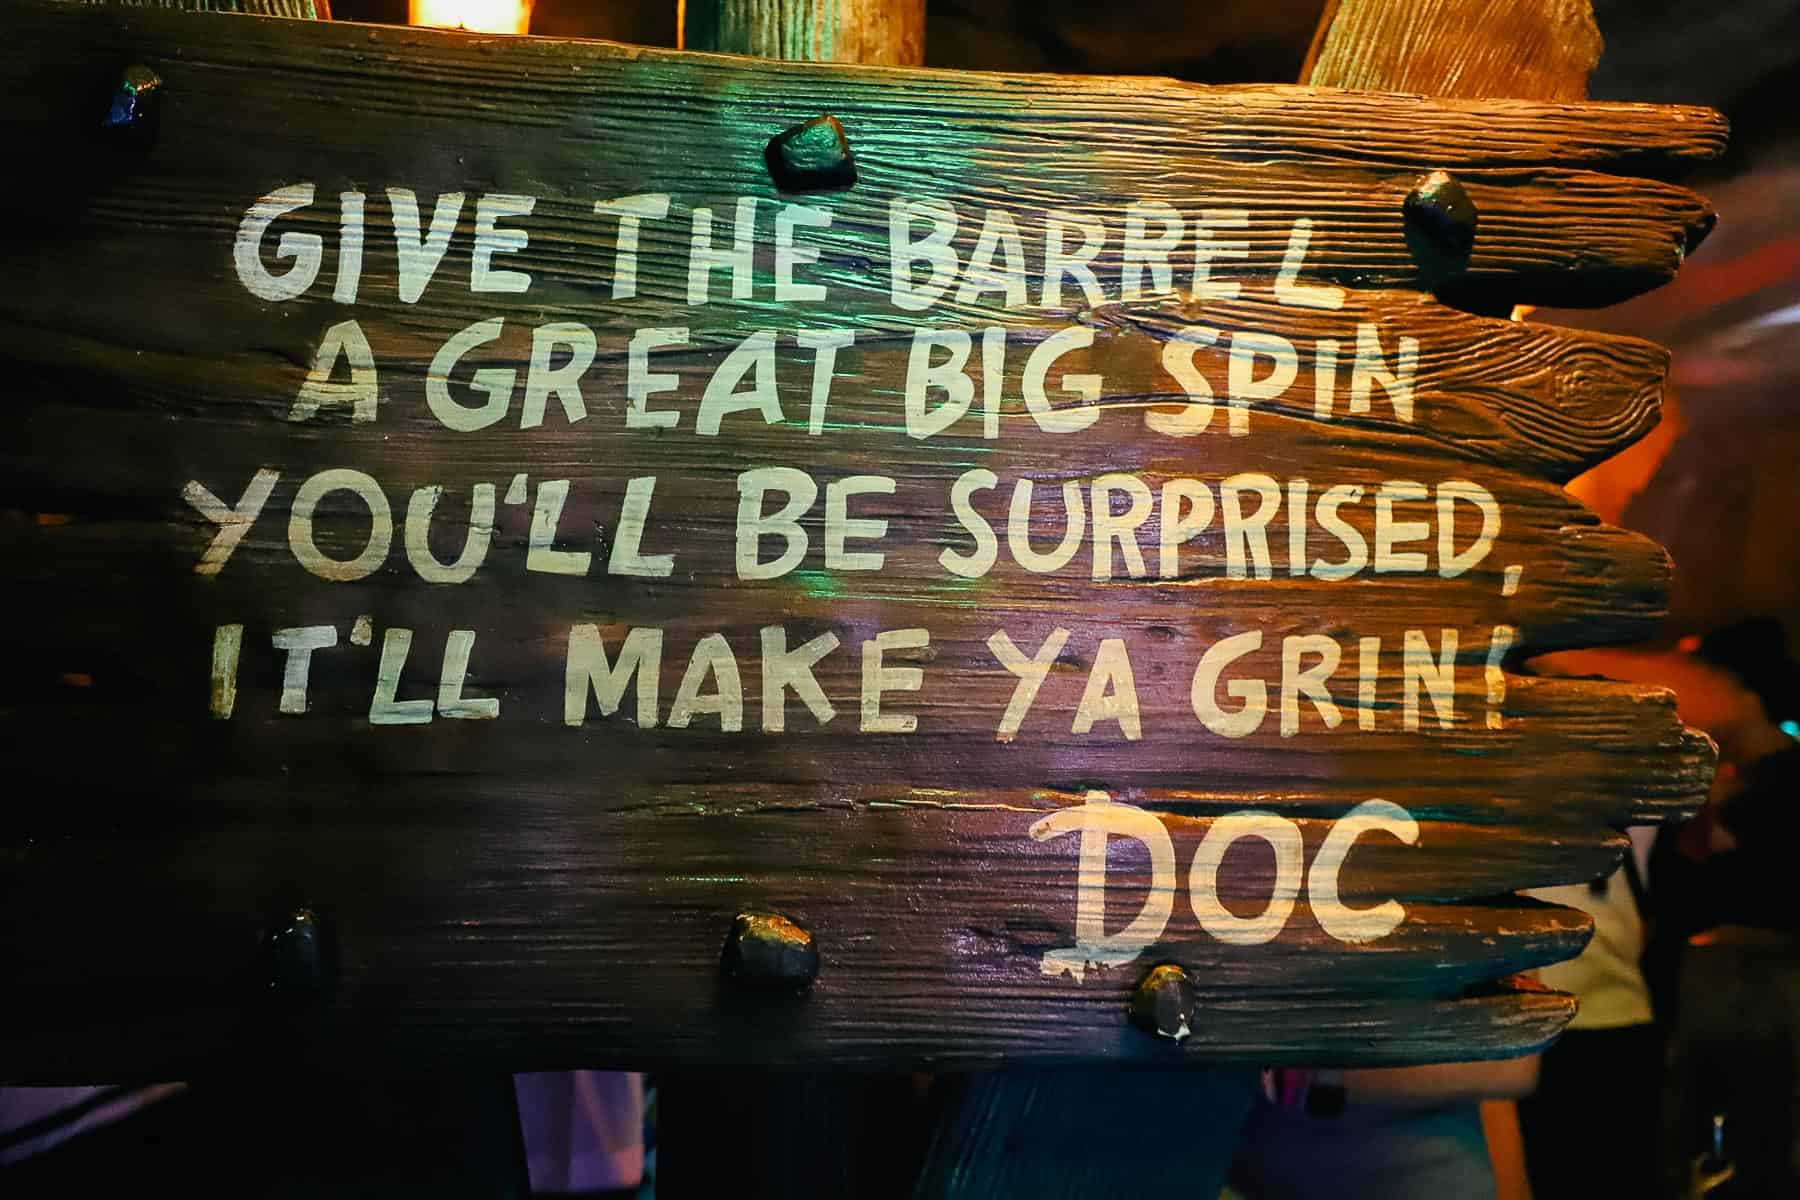 A queue sign that reads "Give the Barrel a great big spin, you'll be surprised, it'll make ya grin." 